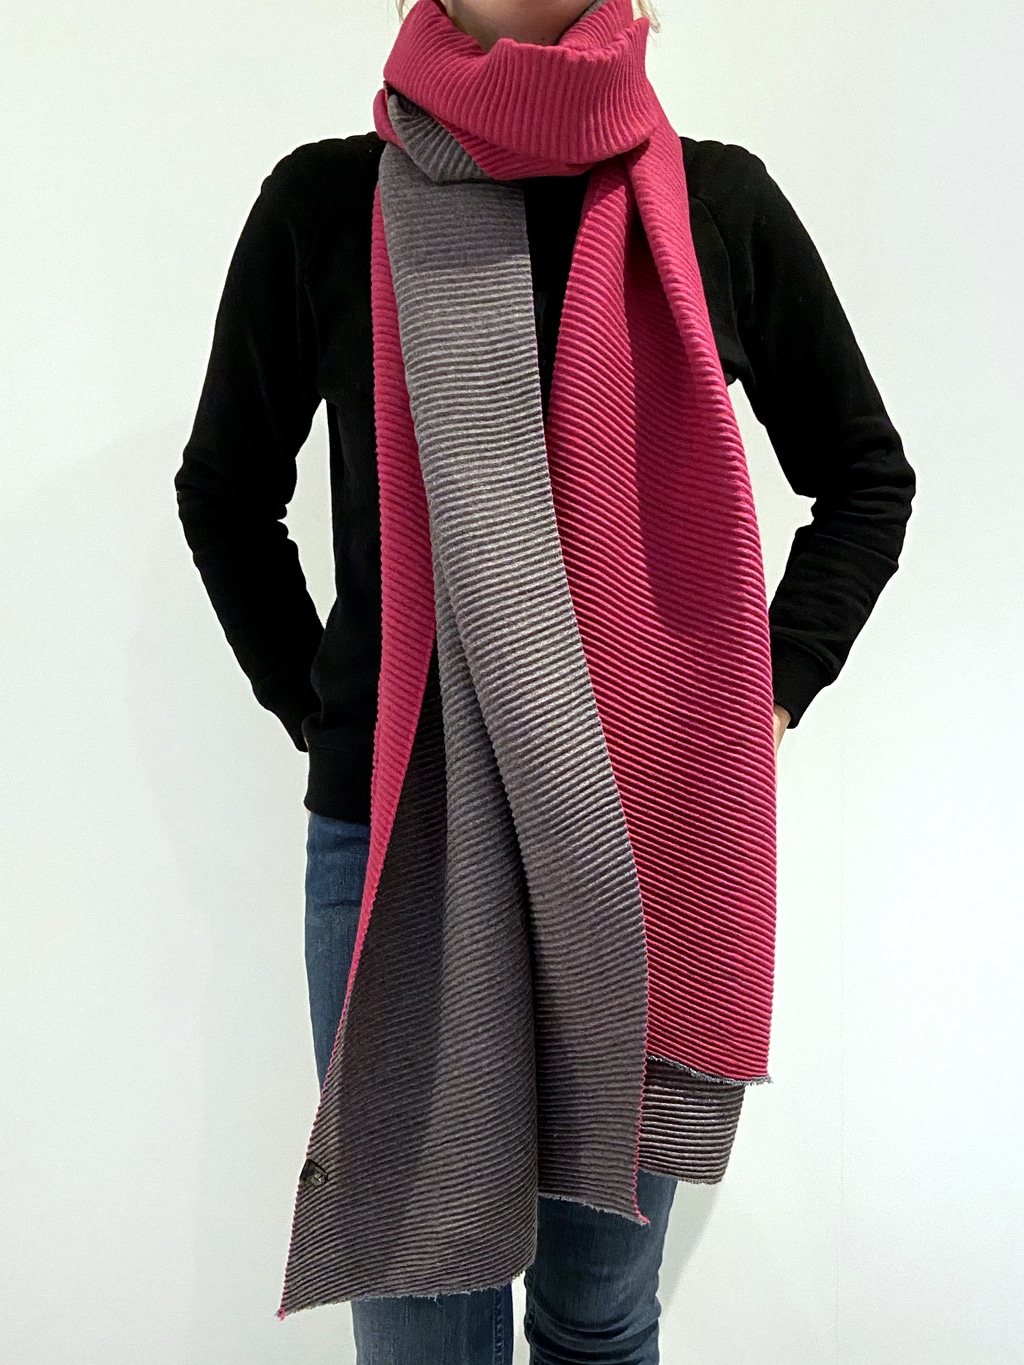 Pink and grey, think ribbed scarf